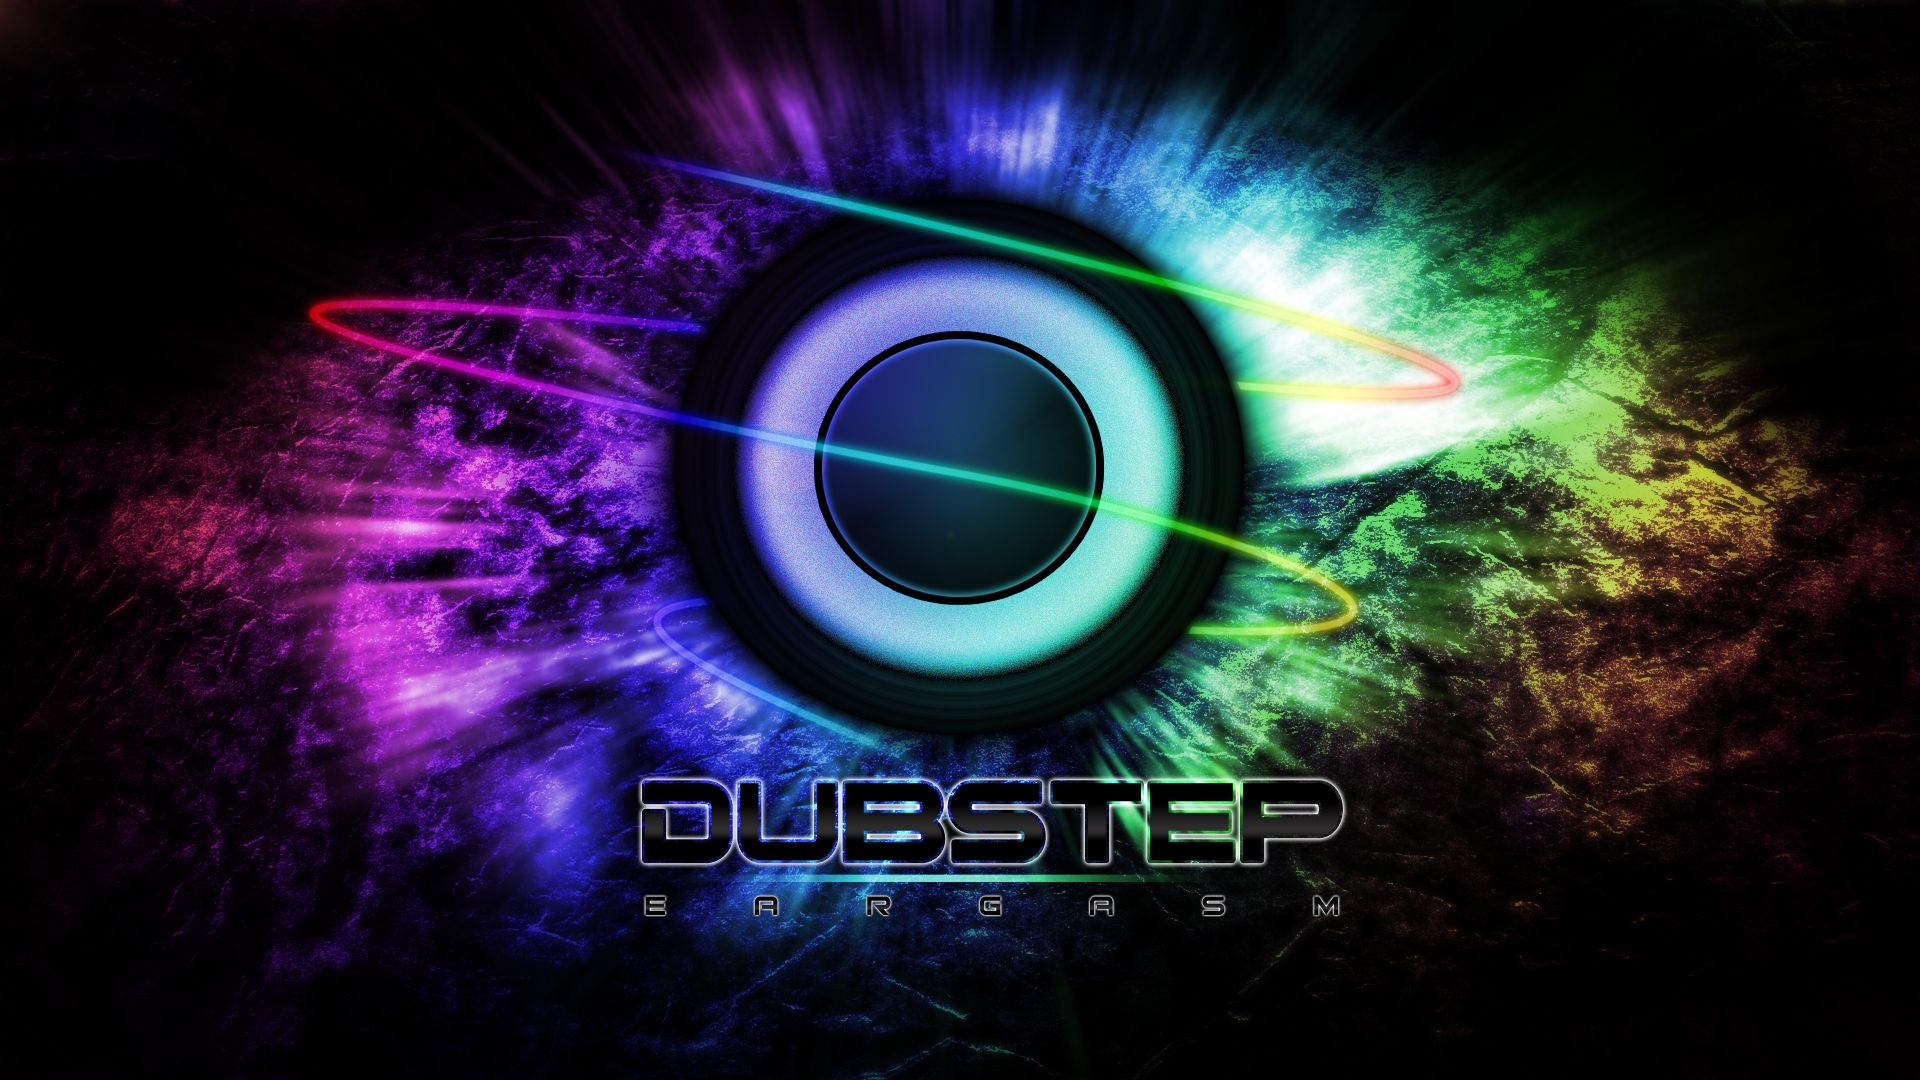 [50+] Awesome Dubstep Wallpapers on WallpaperSafari